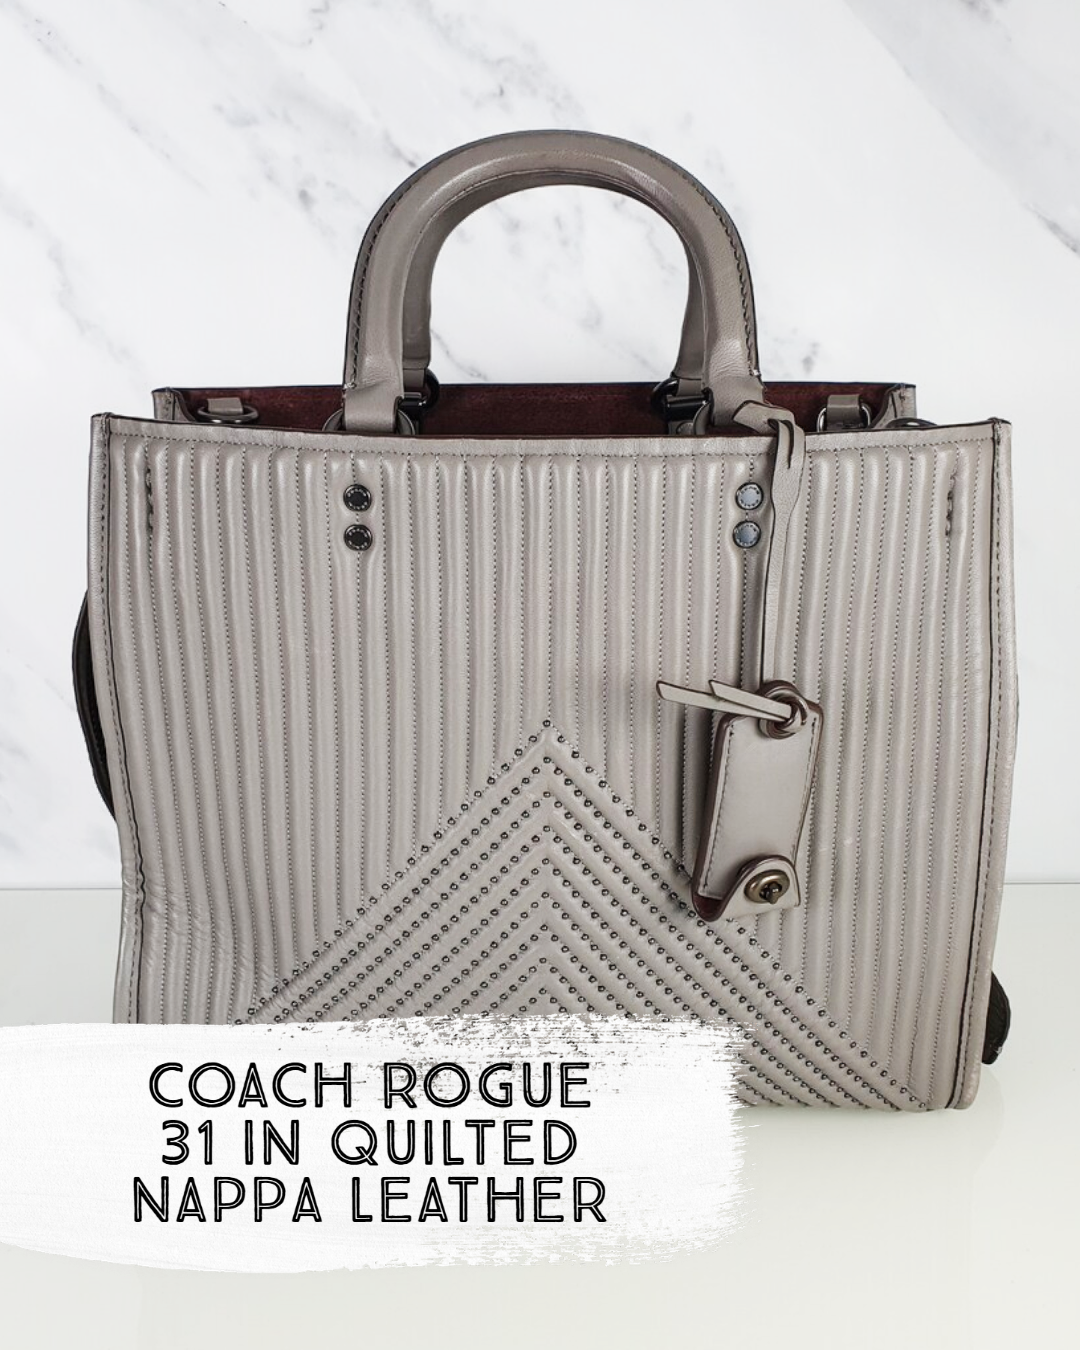 Coach Rogue 31 in Quilted Nappa Leather With Chevrons & Studs - Essex Fashion House